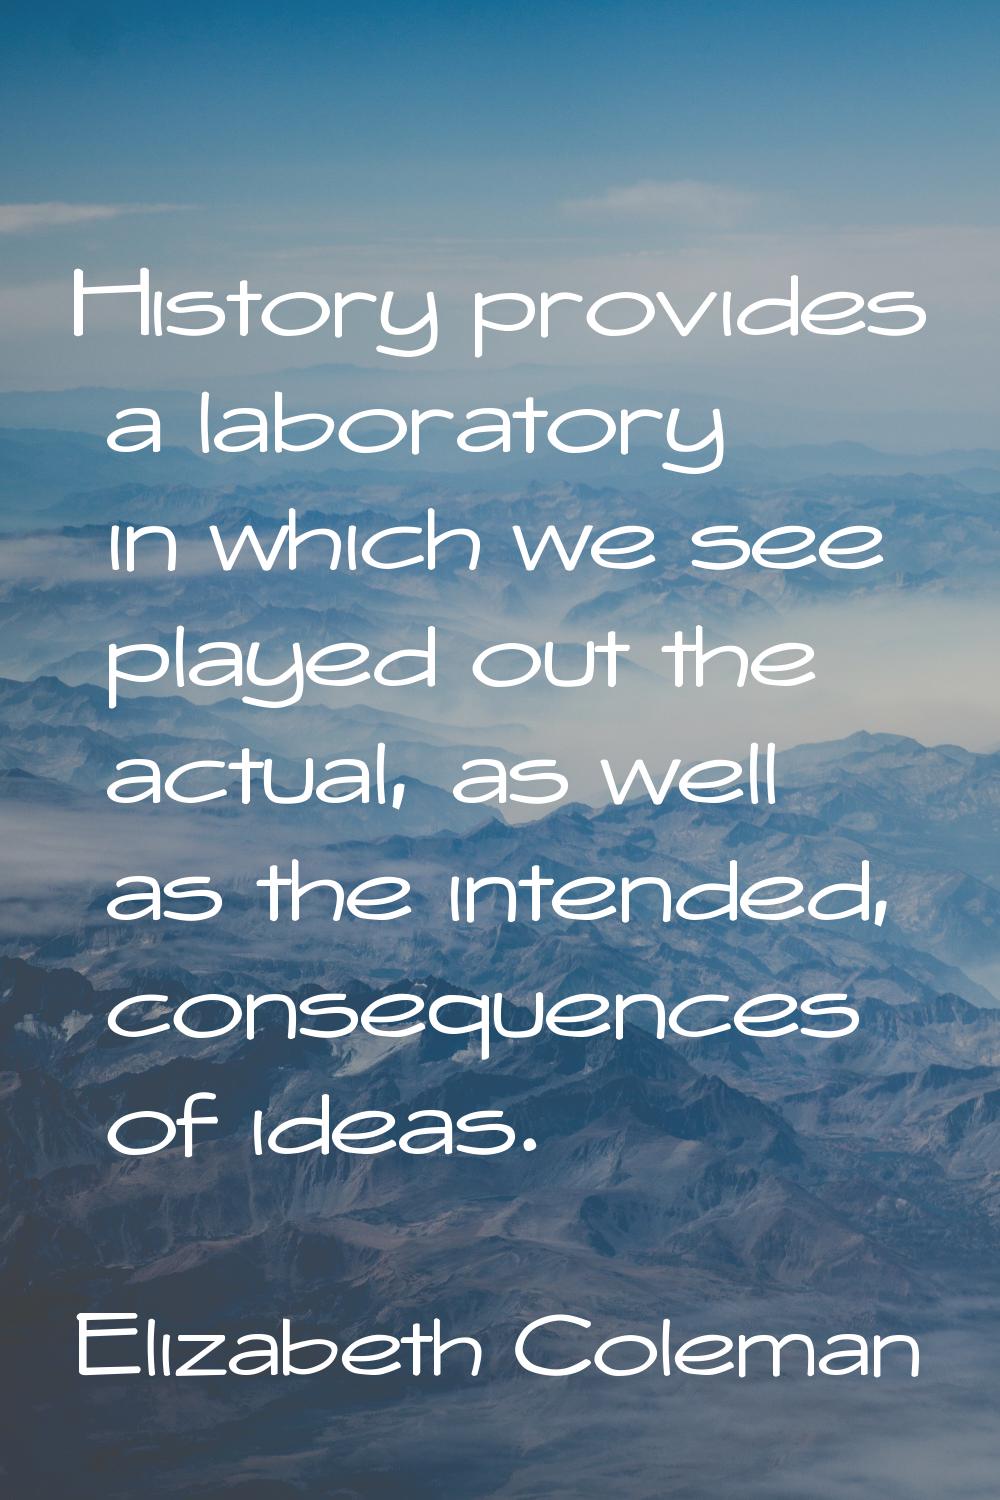 History provides a laboratory in which we see played out the actual, as well as the intended, conse